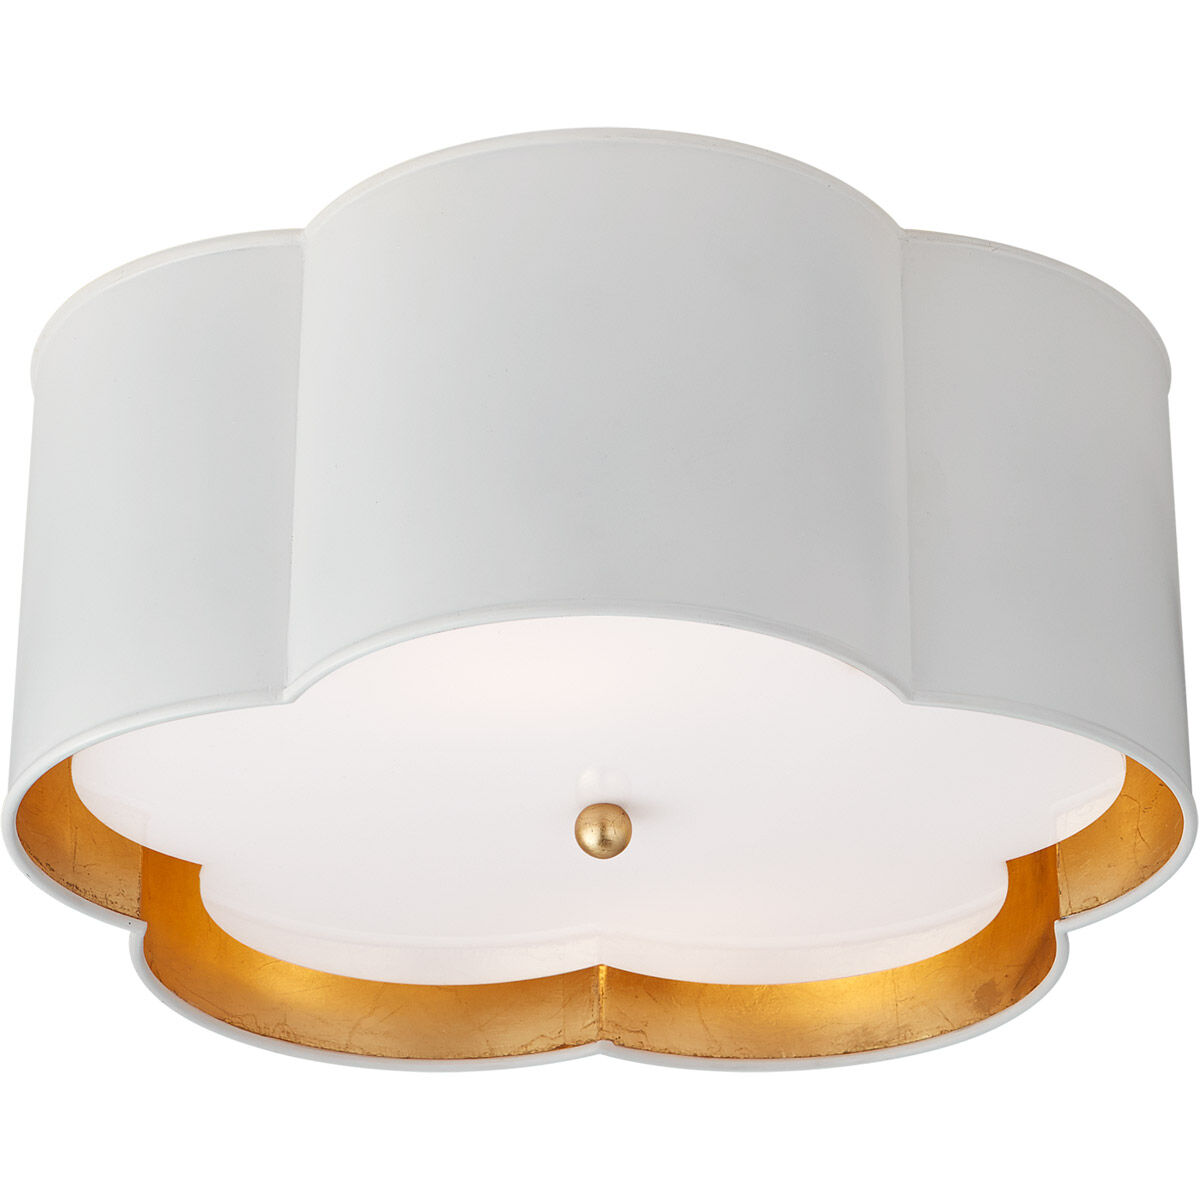 kate spade new york Bryce 2 Light 15 inch Pink and White Flush Mount  Ceiling Light